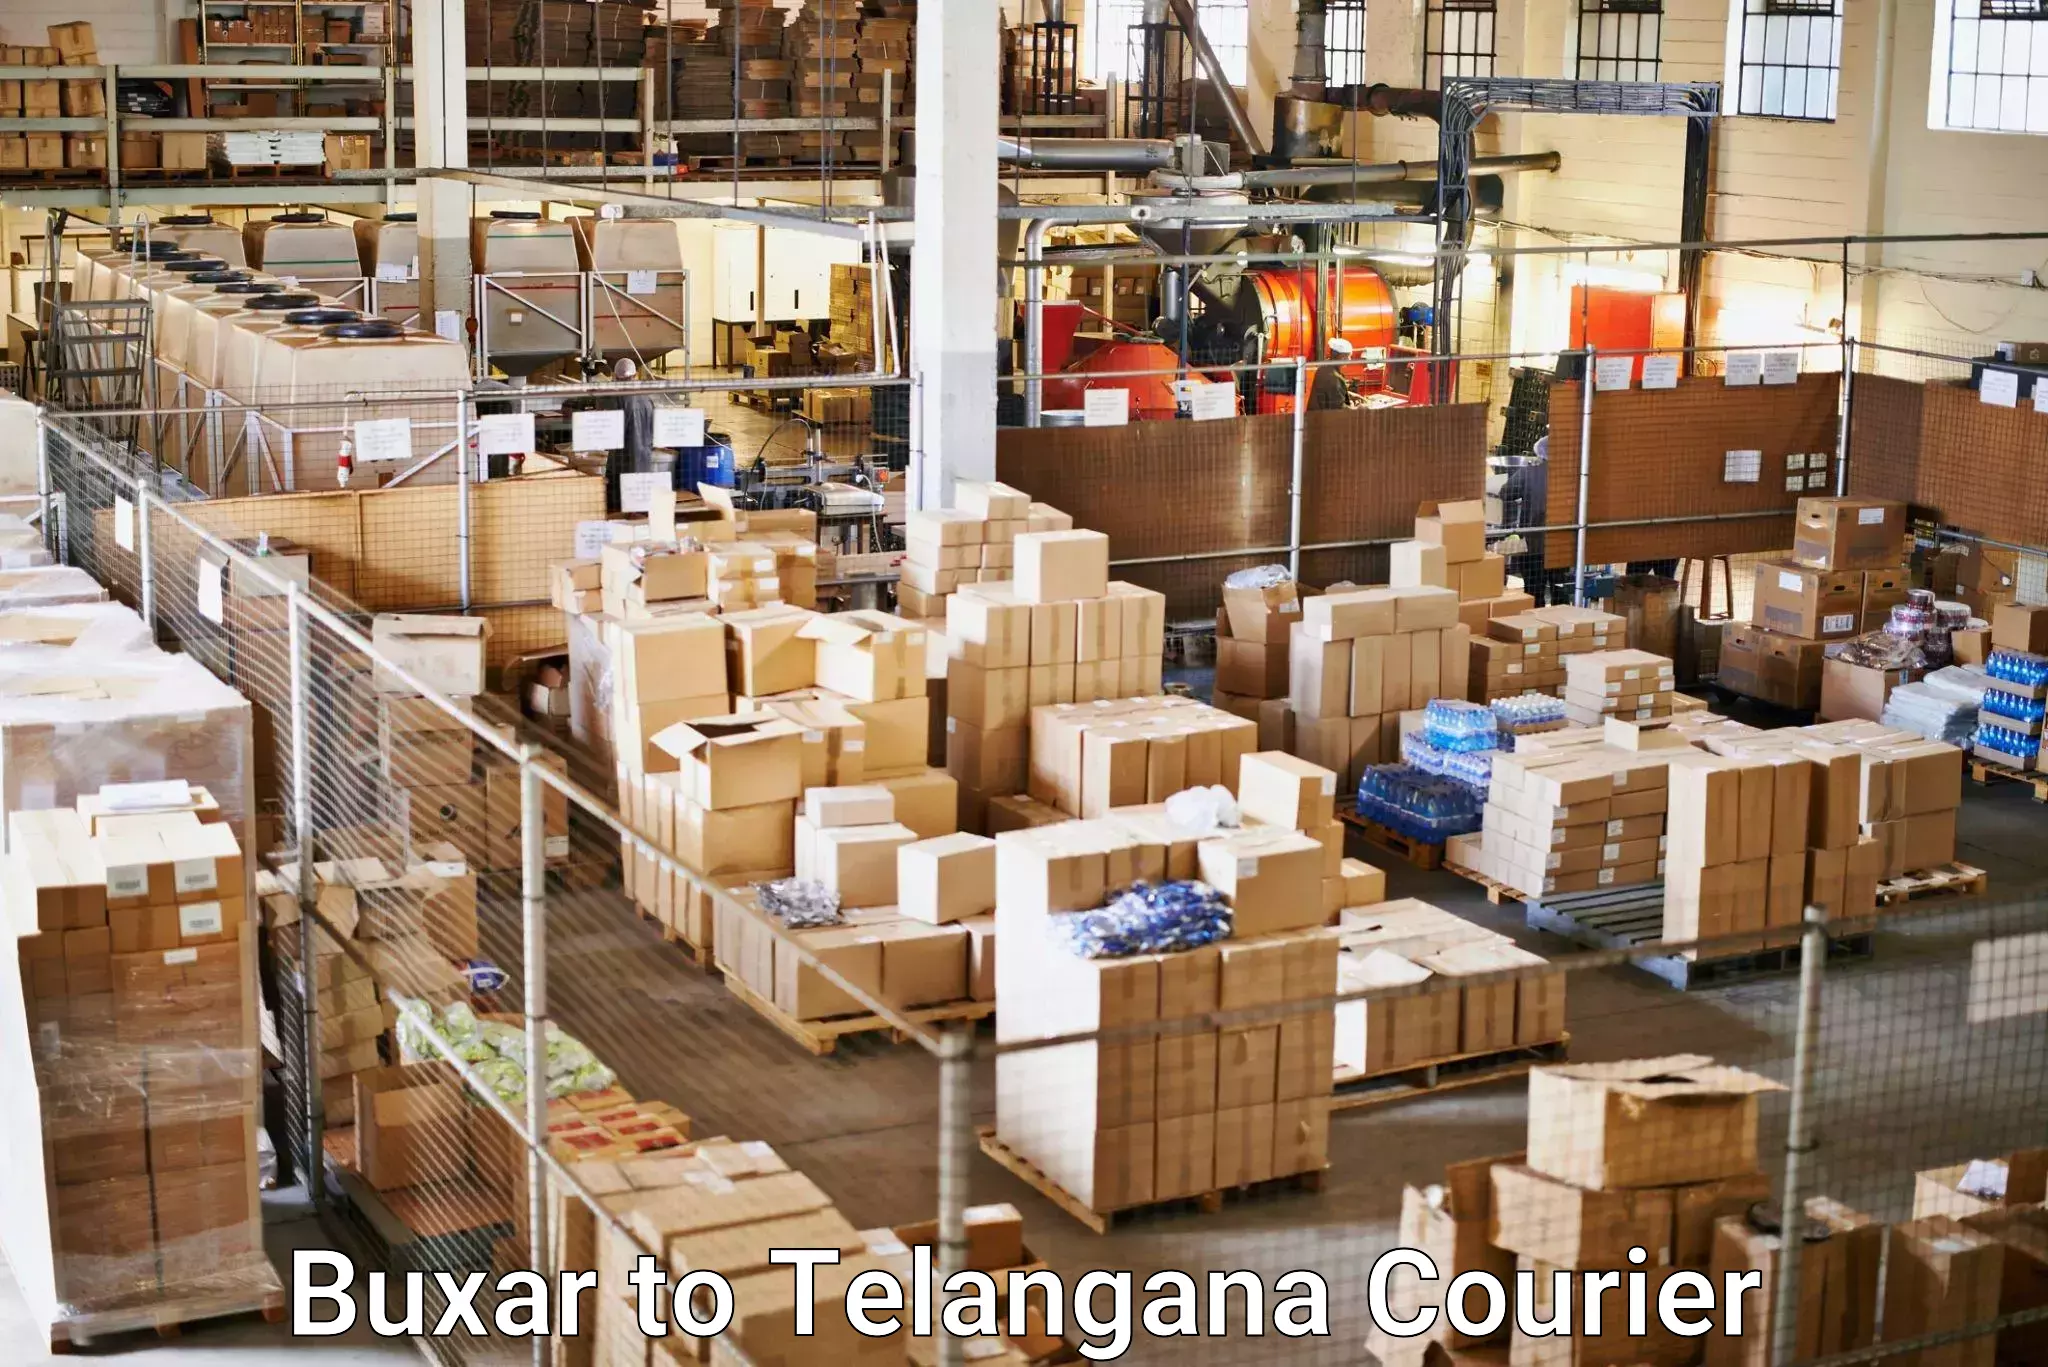 International courier networks Buxar to Bijinapalle